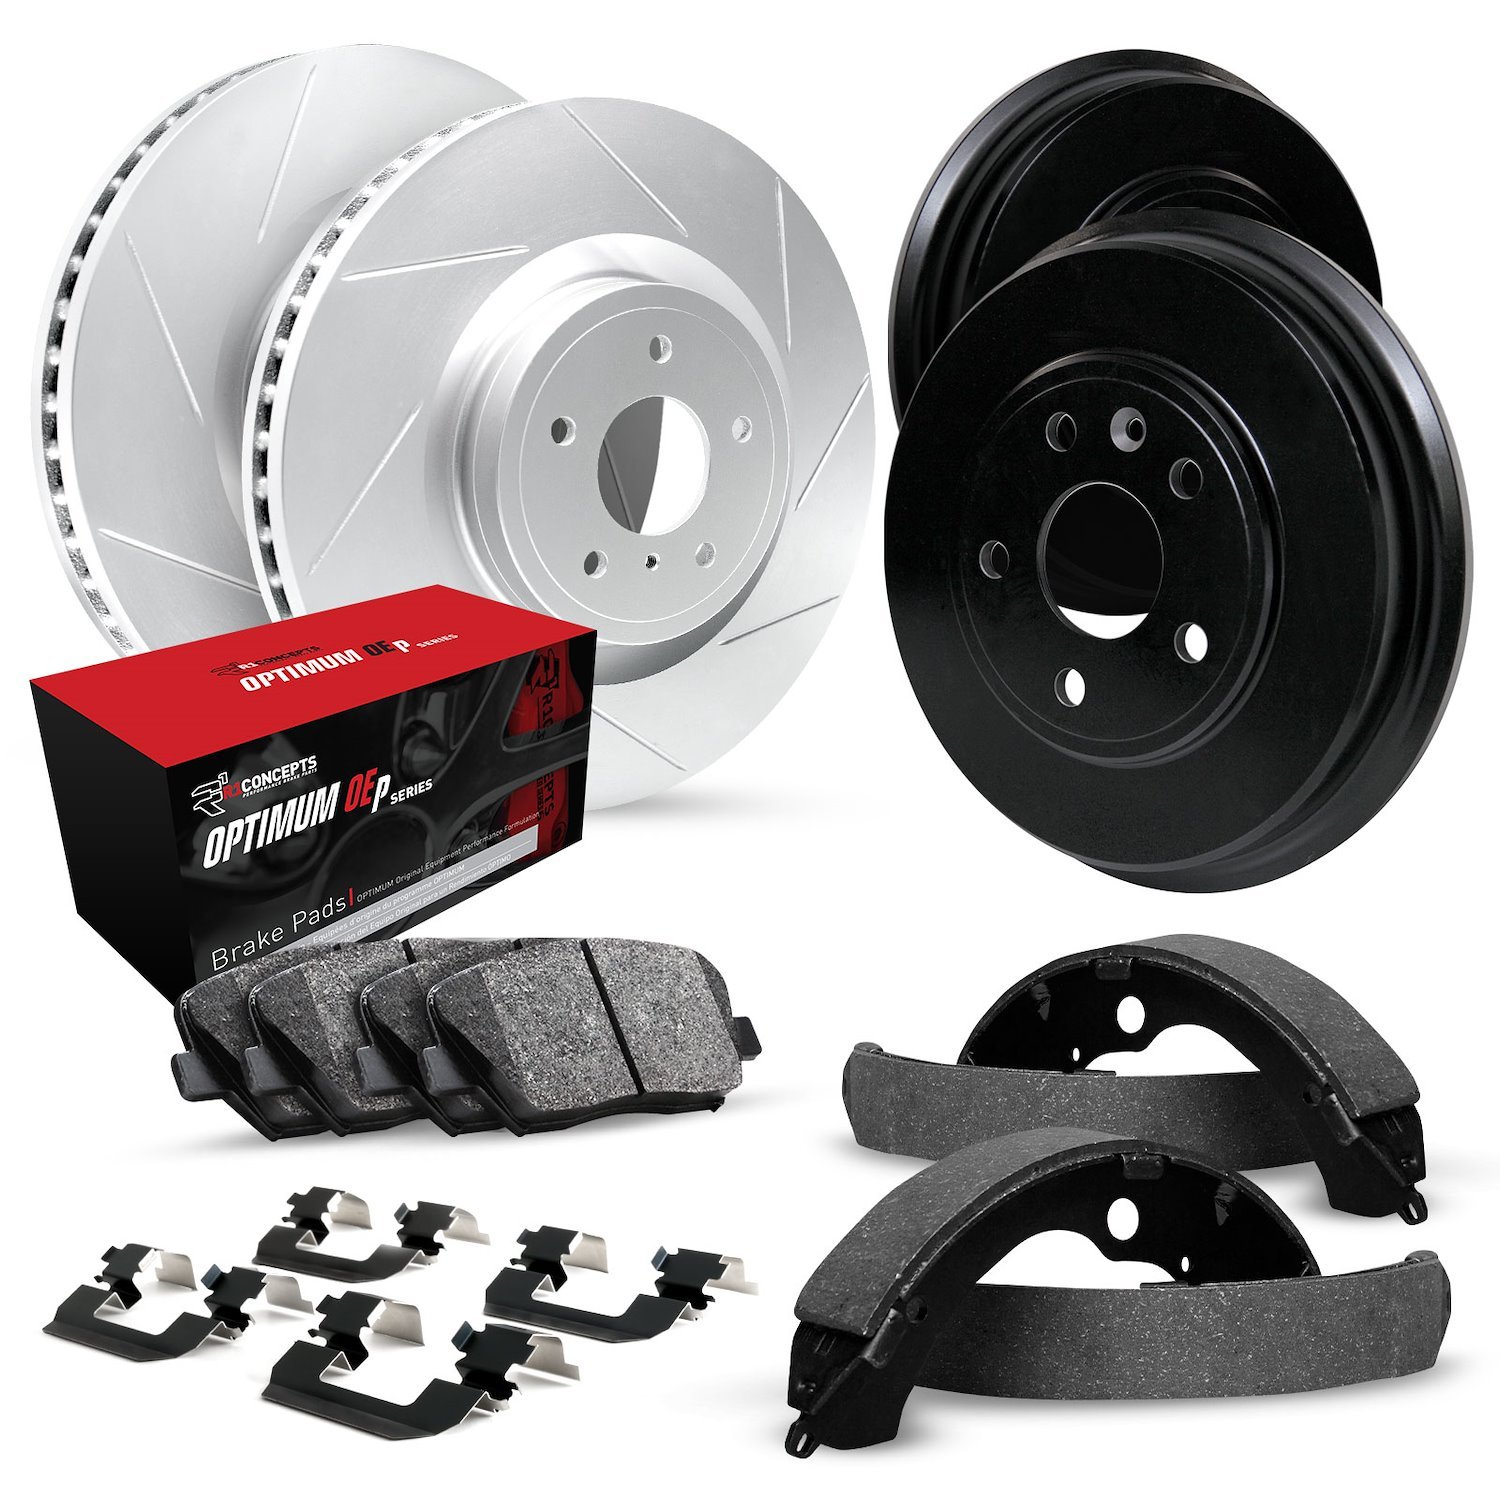 GEO-Carbon Slotted Brake Rotor & Drum Set w/Optimum OE Pads, Shoes, & Hardware, 1991-1994 GM, Position: Front & Rear